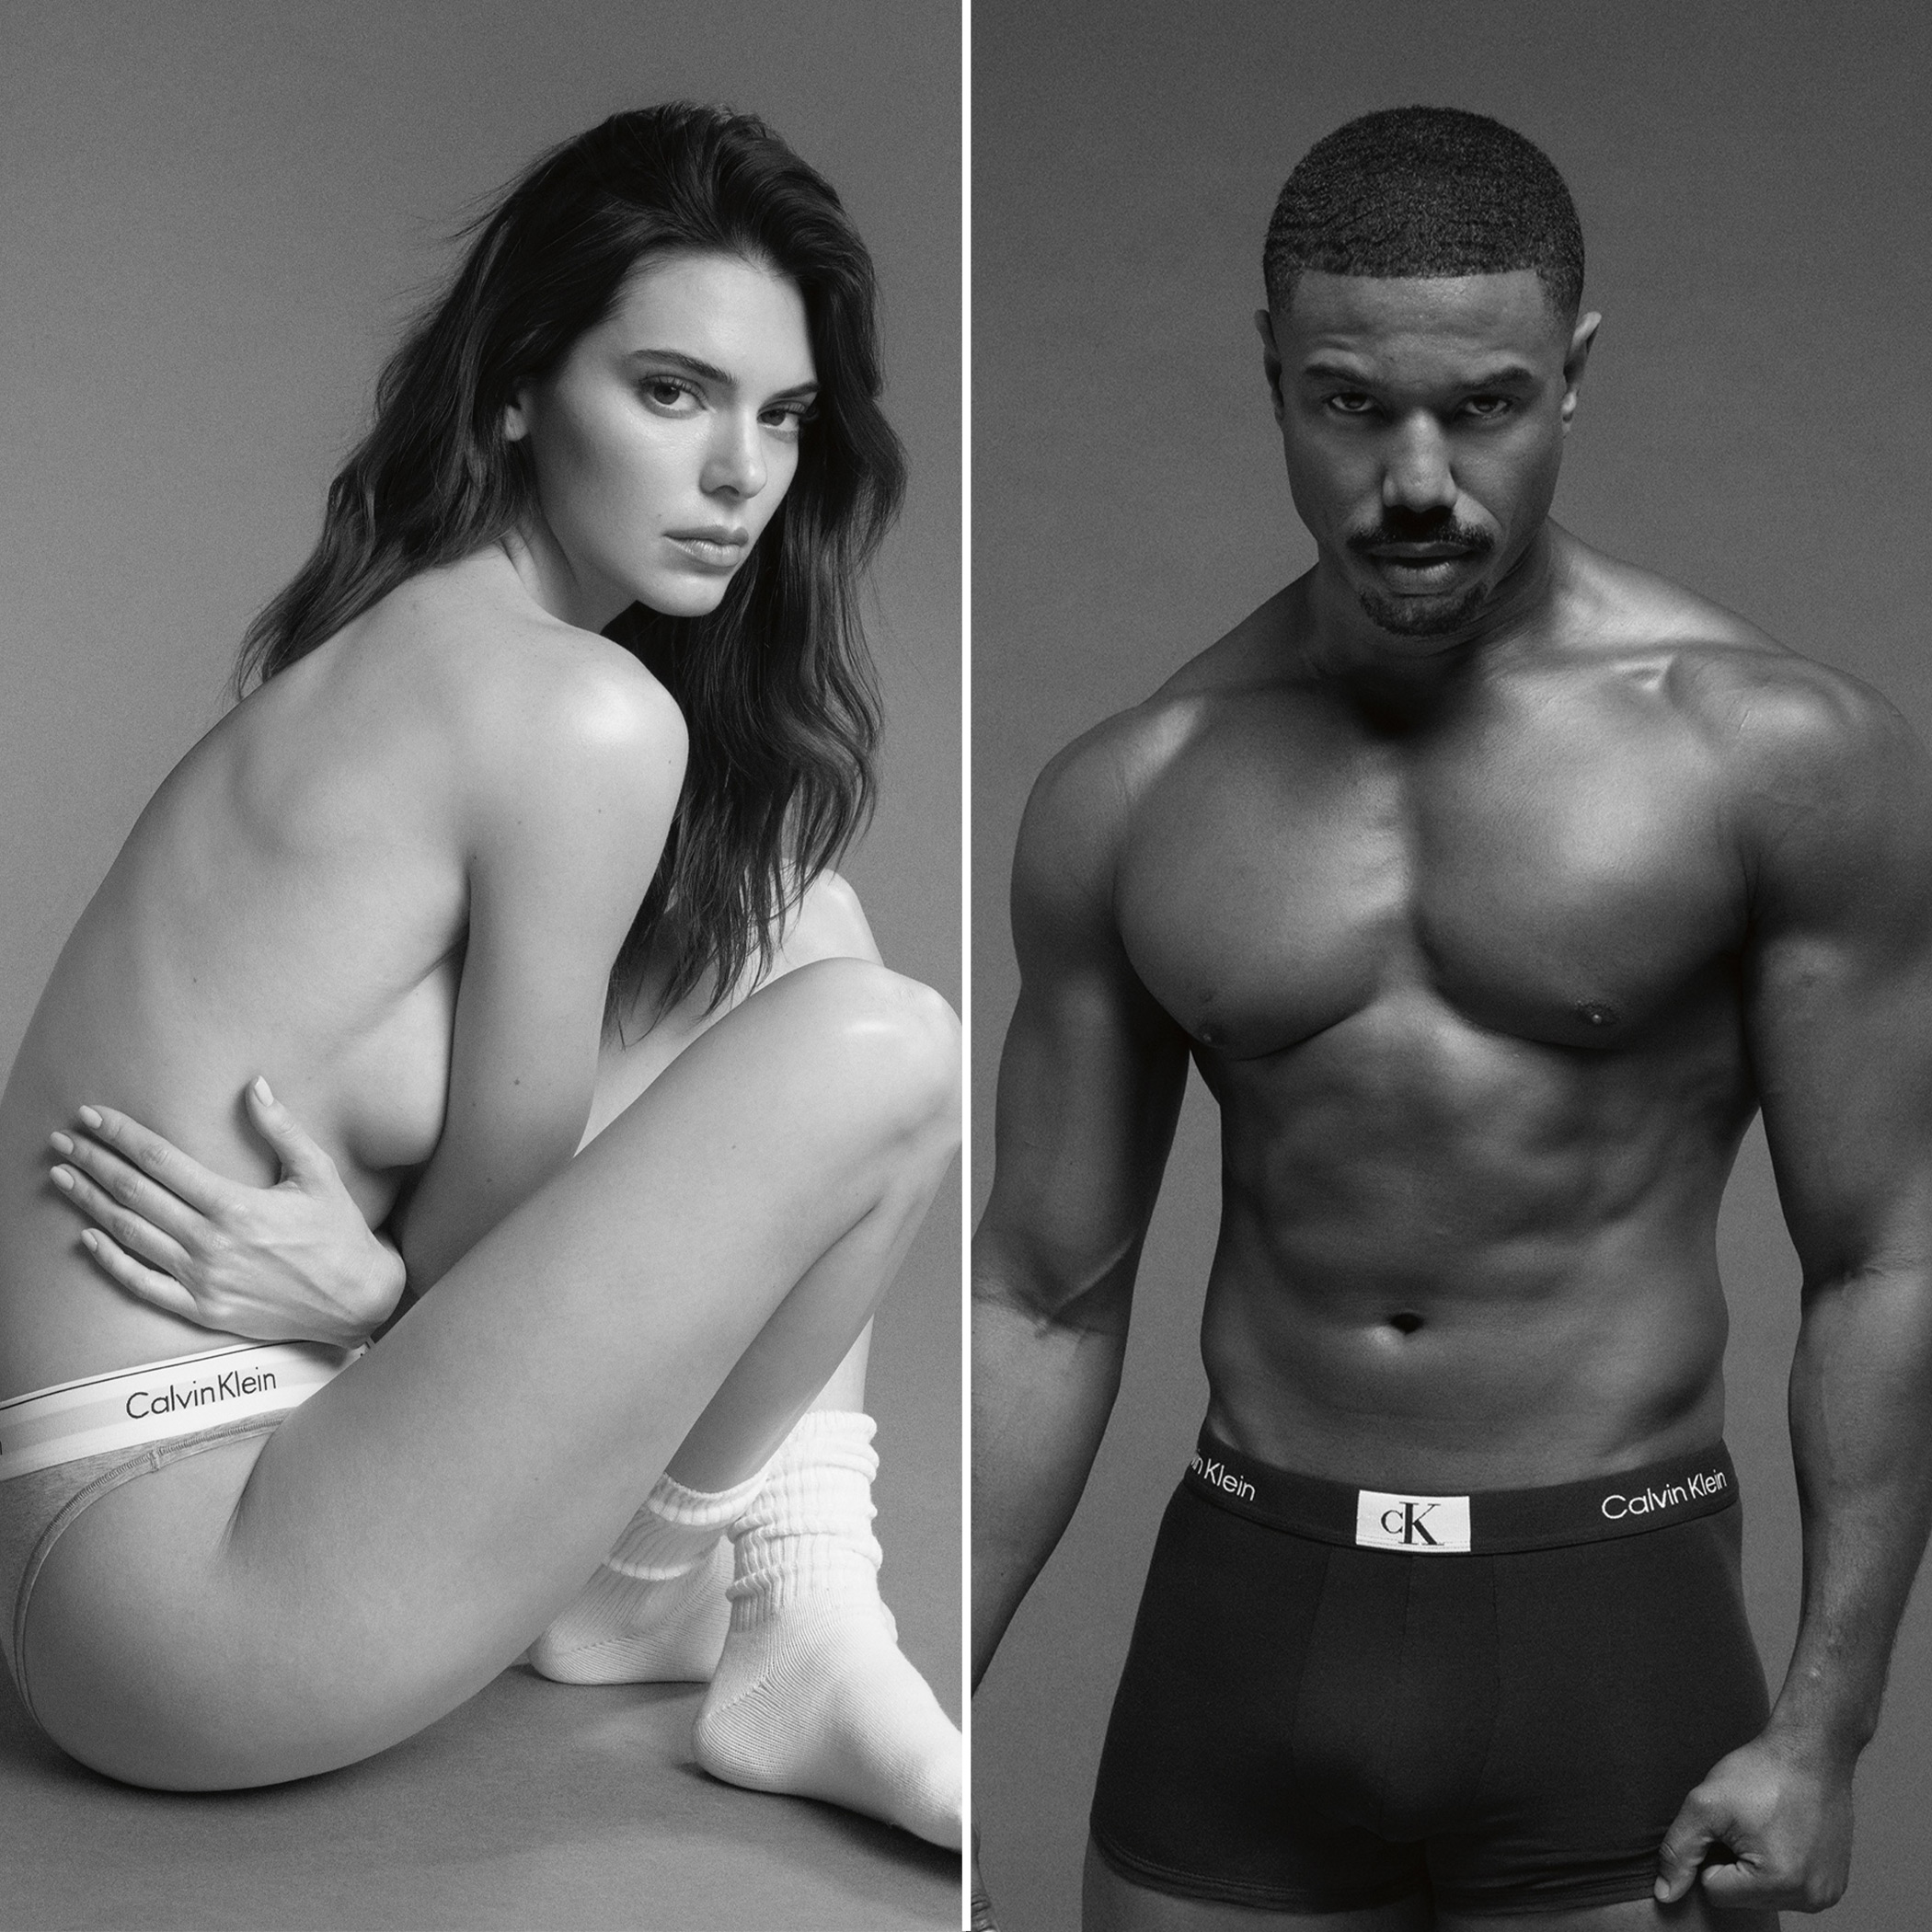 Calvin Klein Seeks The Next Hot Underwear Model, Plus More From The Web